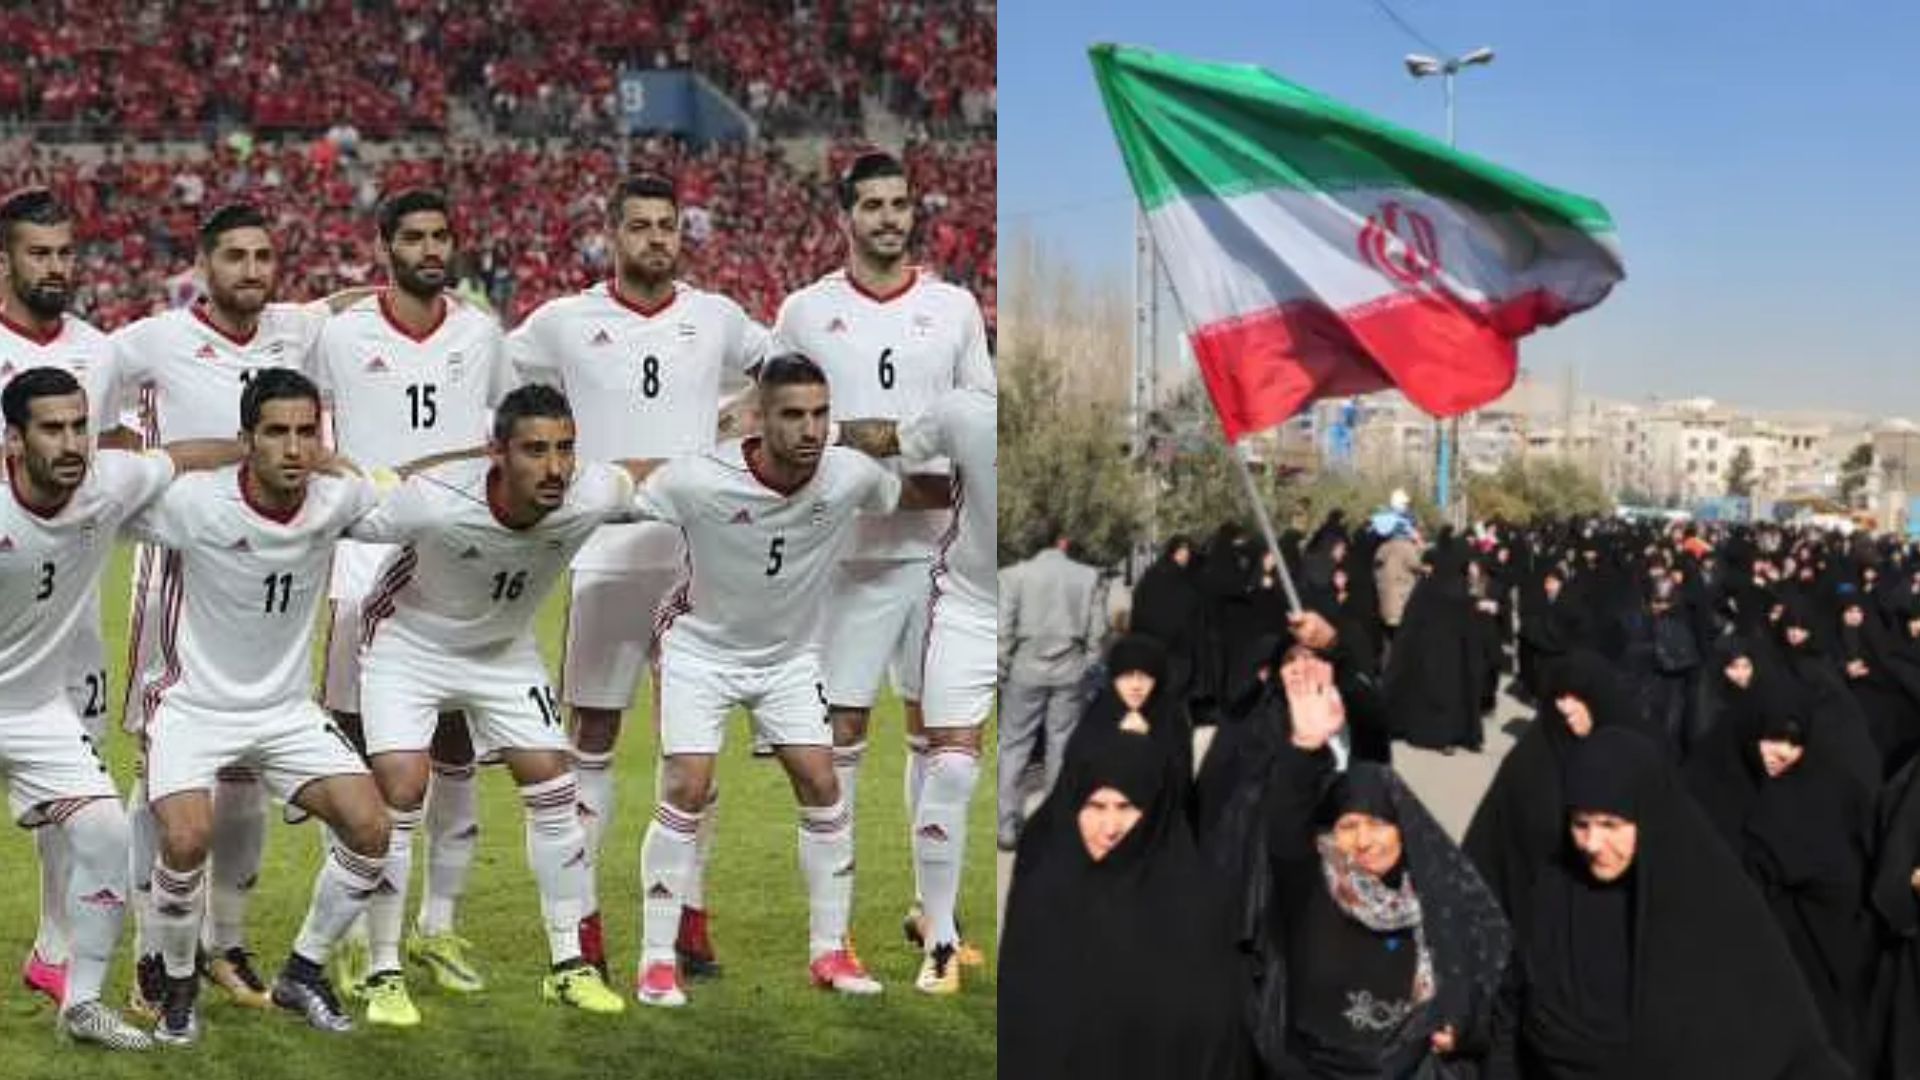 Women’s Rights Group Calls Iranian FA Threat To Security Of Female Fans In Iran, Urges FIFA To Ban The Country From Upcoming Games